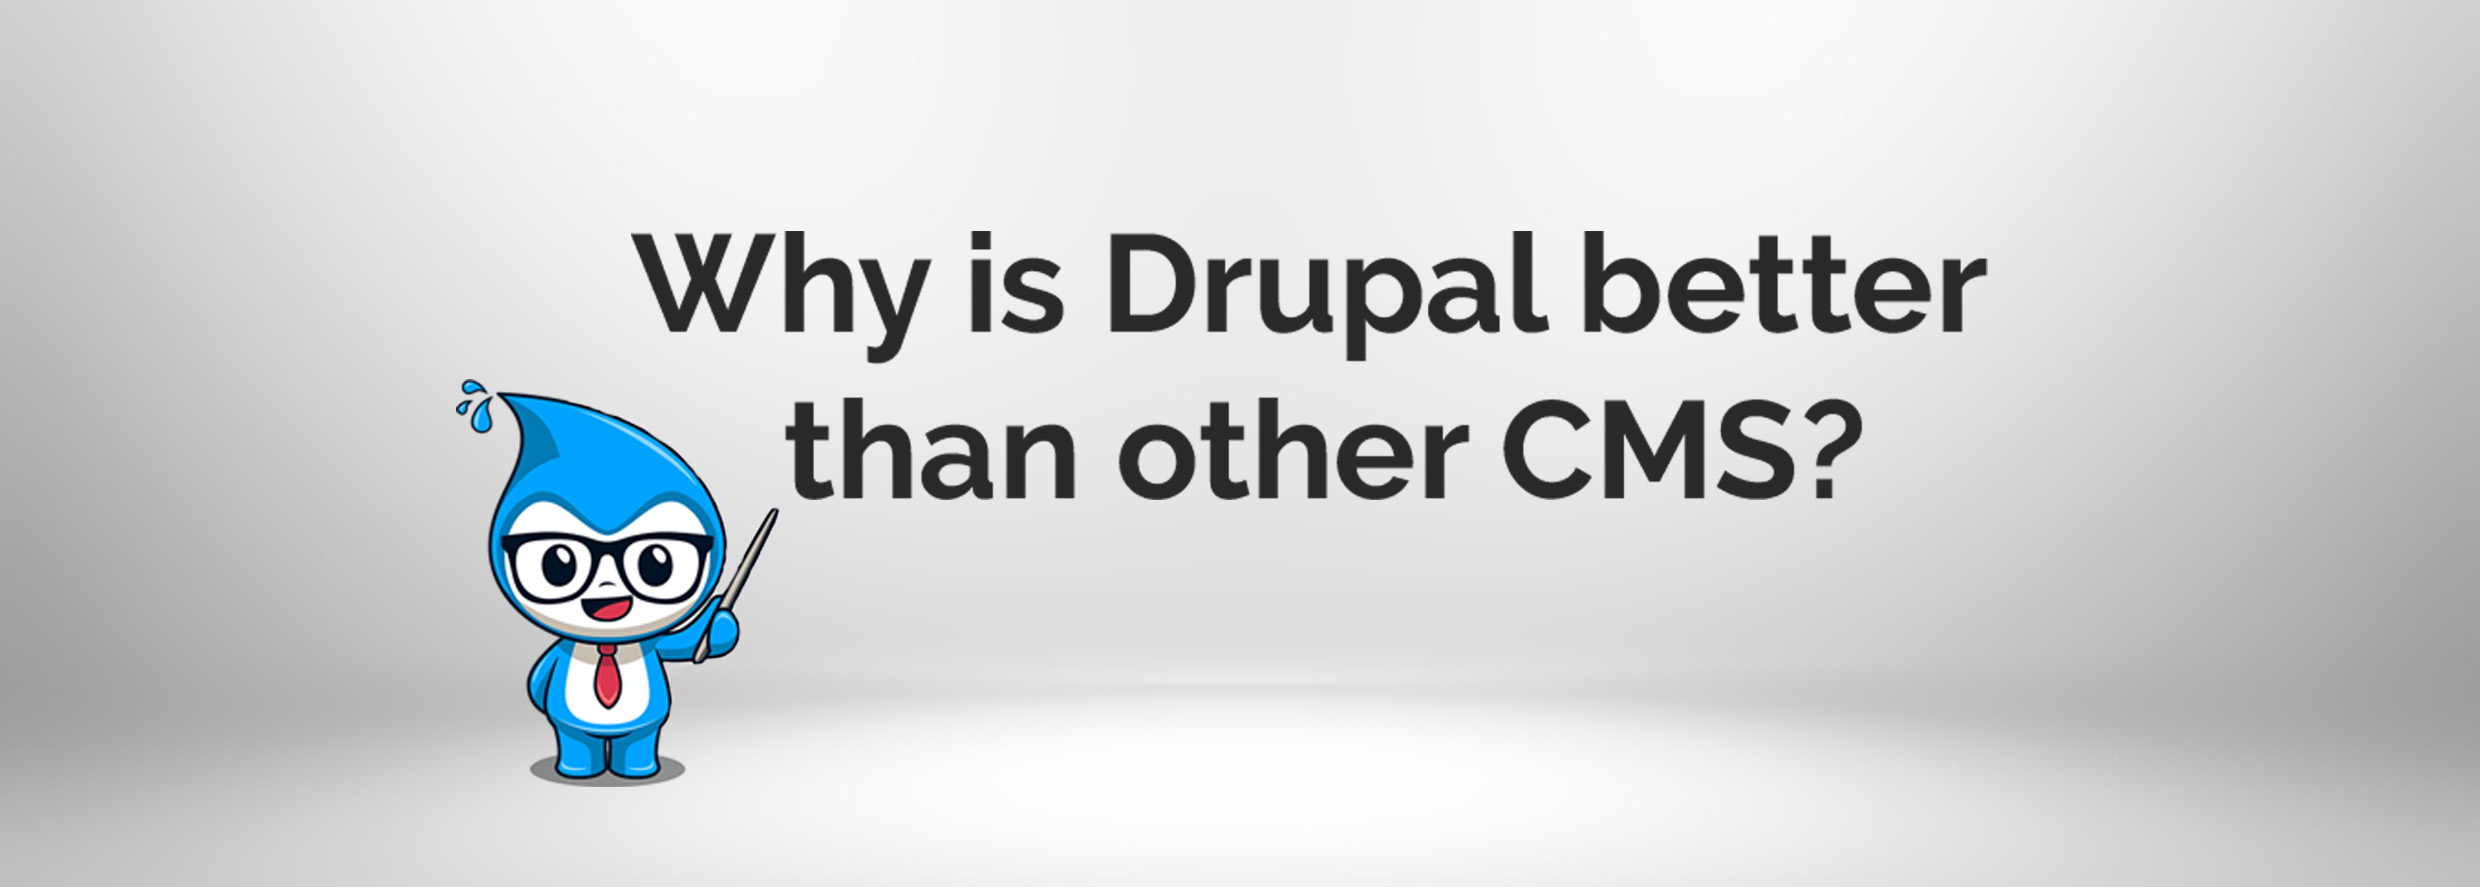 why drupal is batter than cms